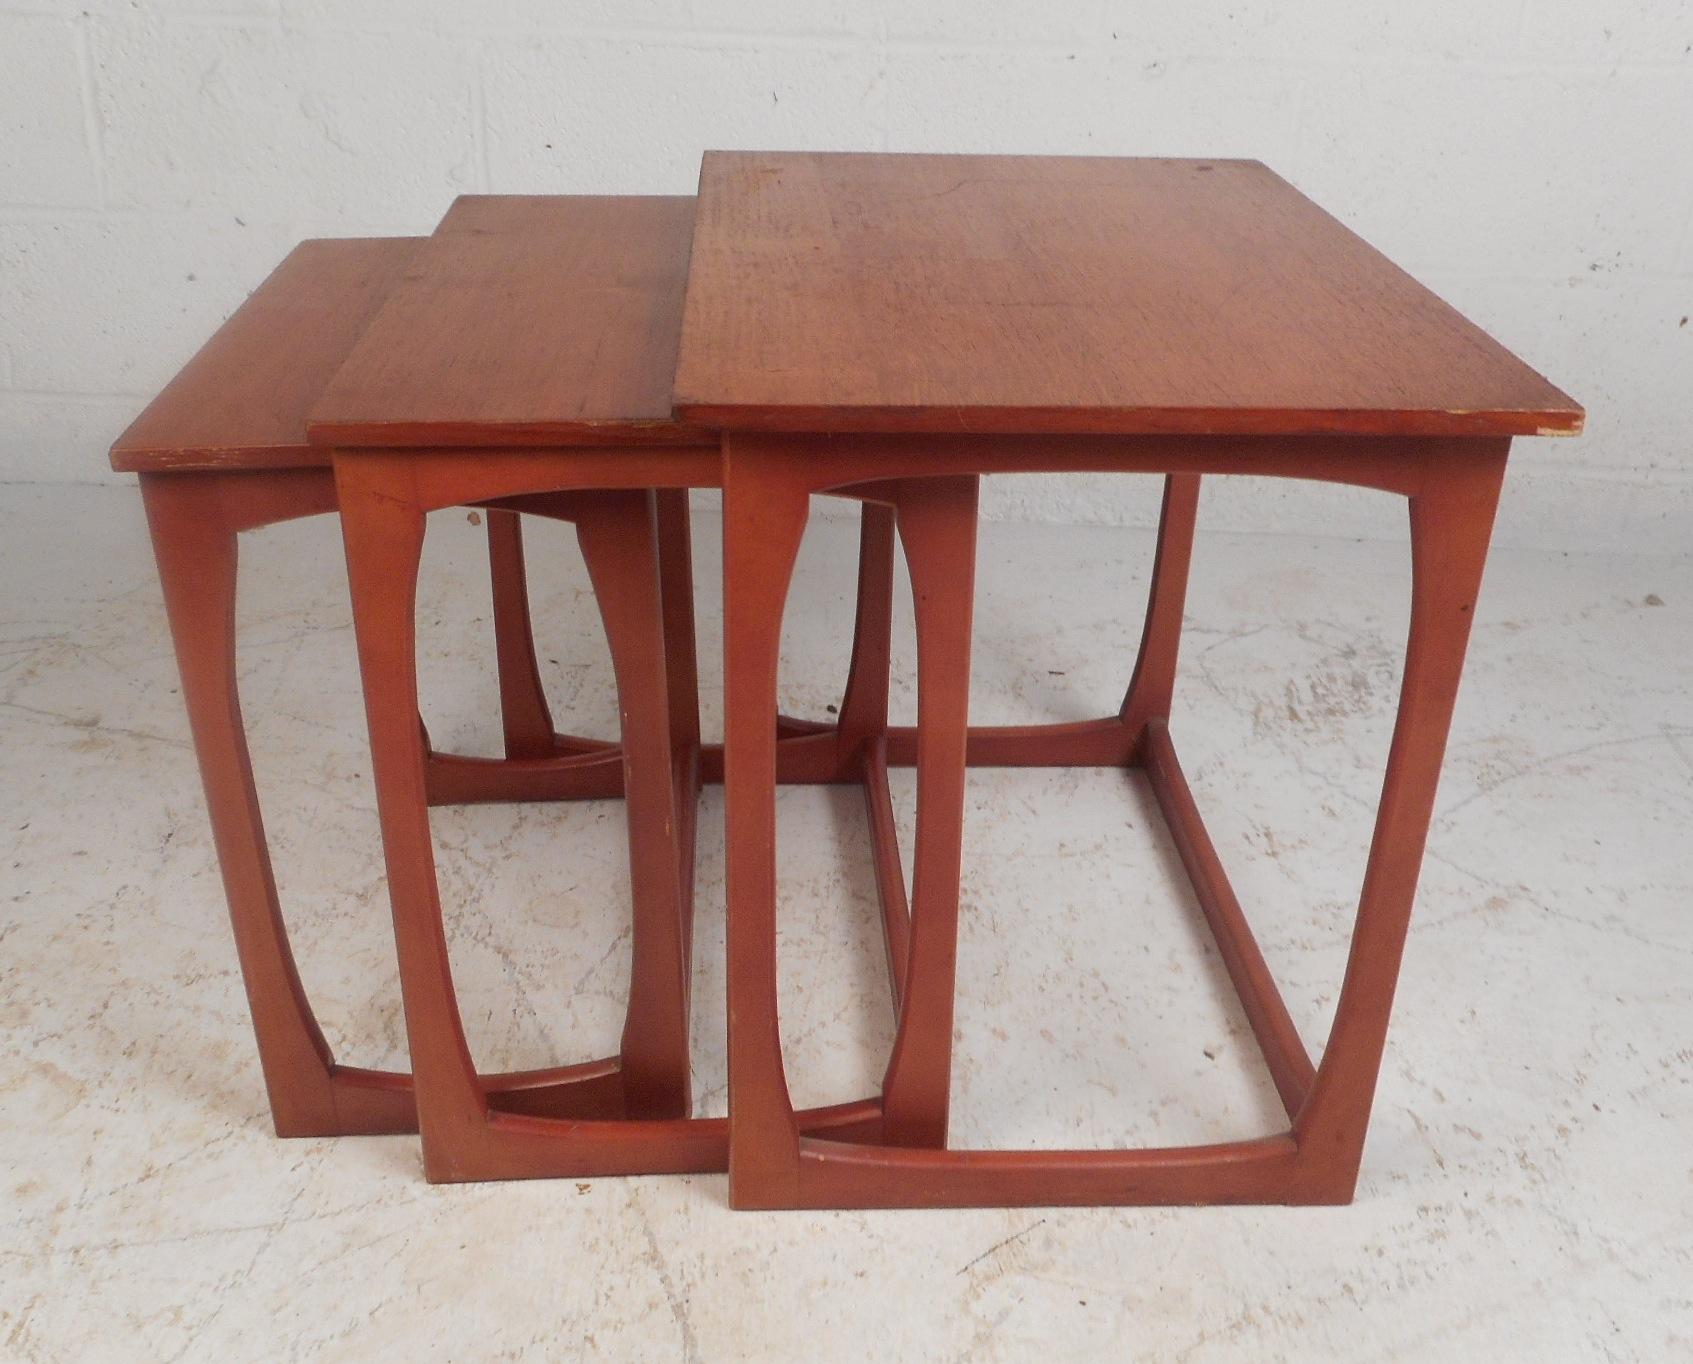 This beautiful set of three vintage modern nesting tables feature sled legs and a vintage teak finish. The sleek design allows this set to conveniently slide underneath each other for easy storage. This unique set of side tables make the perfect